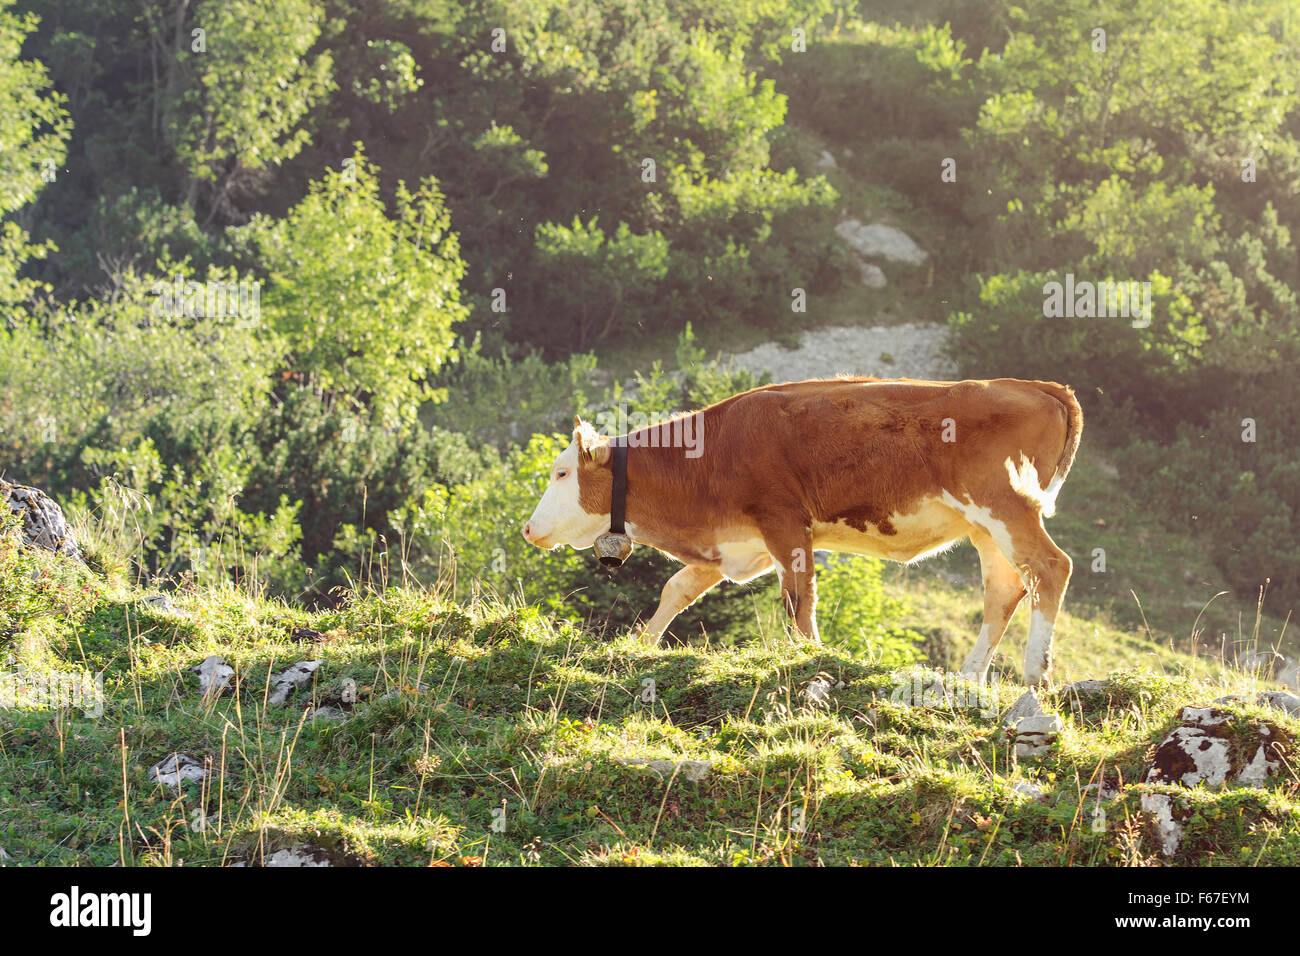 Red and white calf of Hereford breed cattle grazing on sunlit hillside of Alps. Toned and filtered photo with warm summer lighti Stock Photo